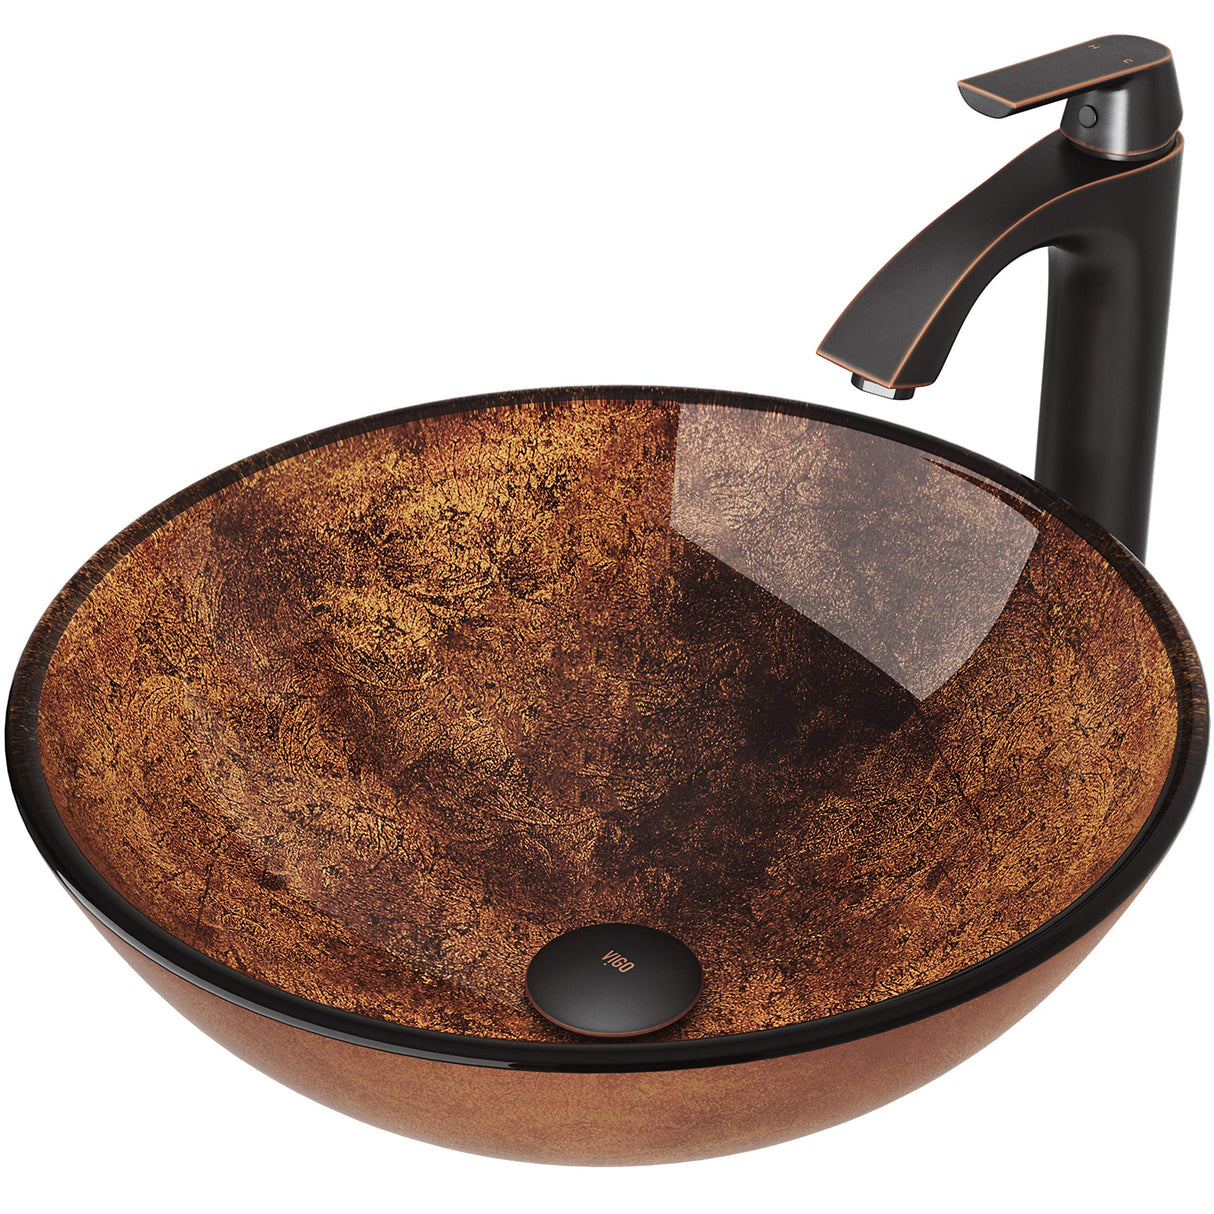 VIGO VGT504 16.5" L -16.5" W -12.38" H Handmade Countertop Glass Round Vessel Bathroom Sink Set in Gold and Brown Fusion Finish with Antique Rubbed Bronze Single-Handle Faucet and Pop Up Drain